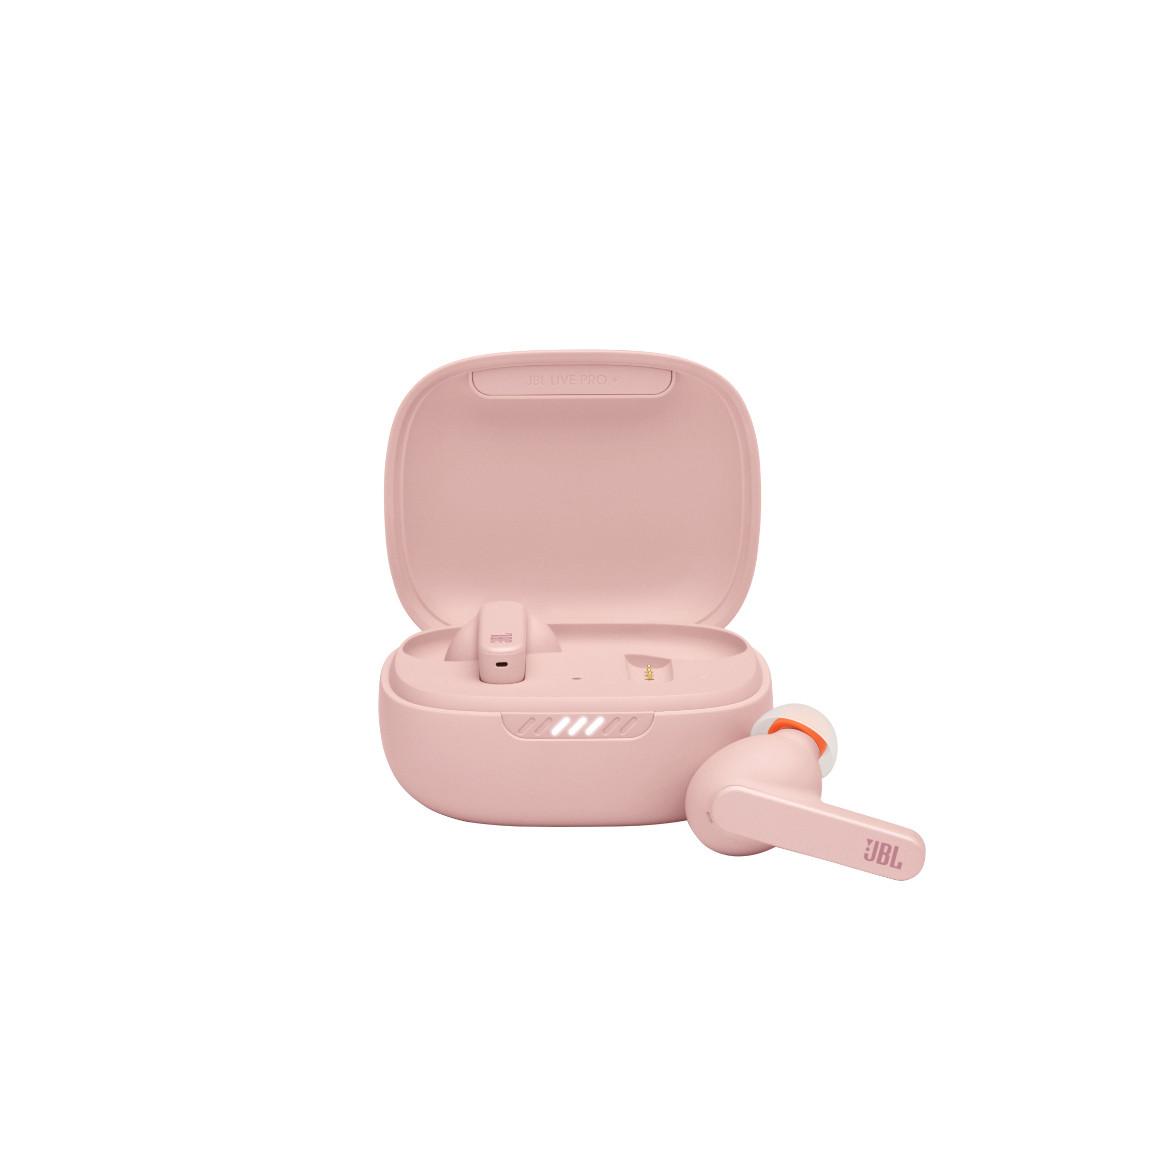 JBL Live Pro+ - Noise-Cancelling Earbuds - pink_offenes Case mit Earbuds